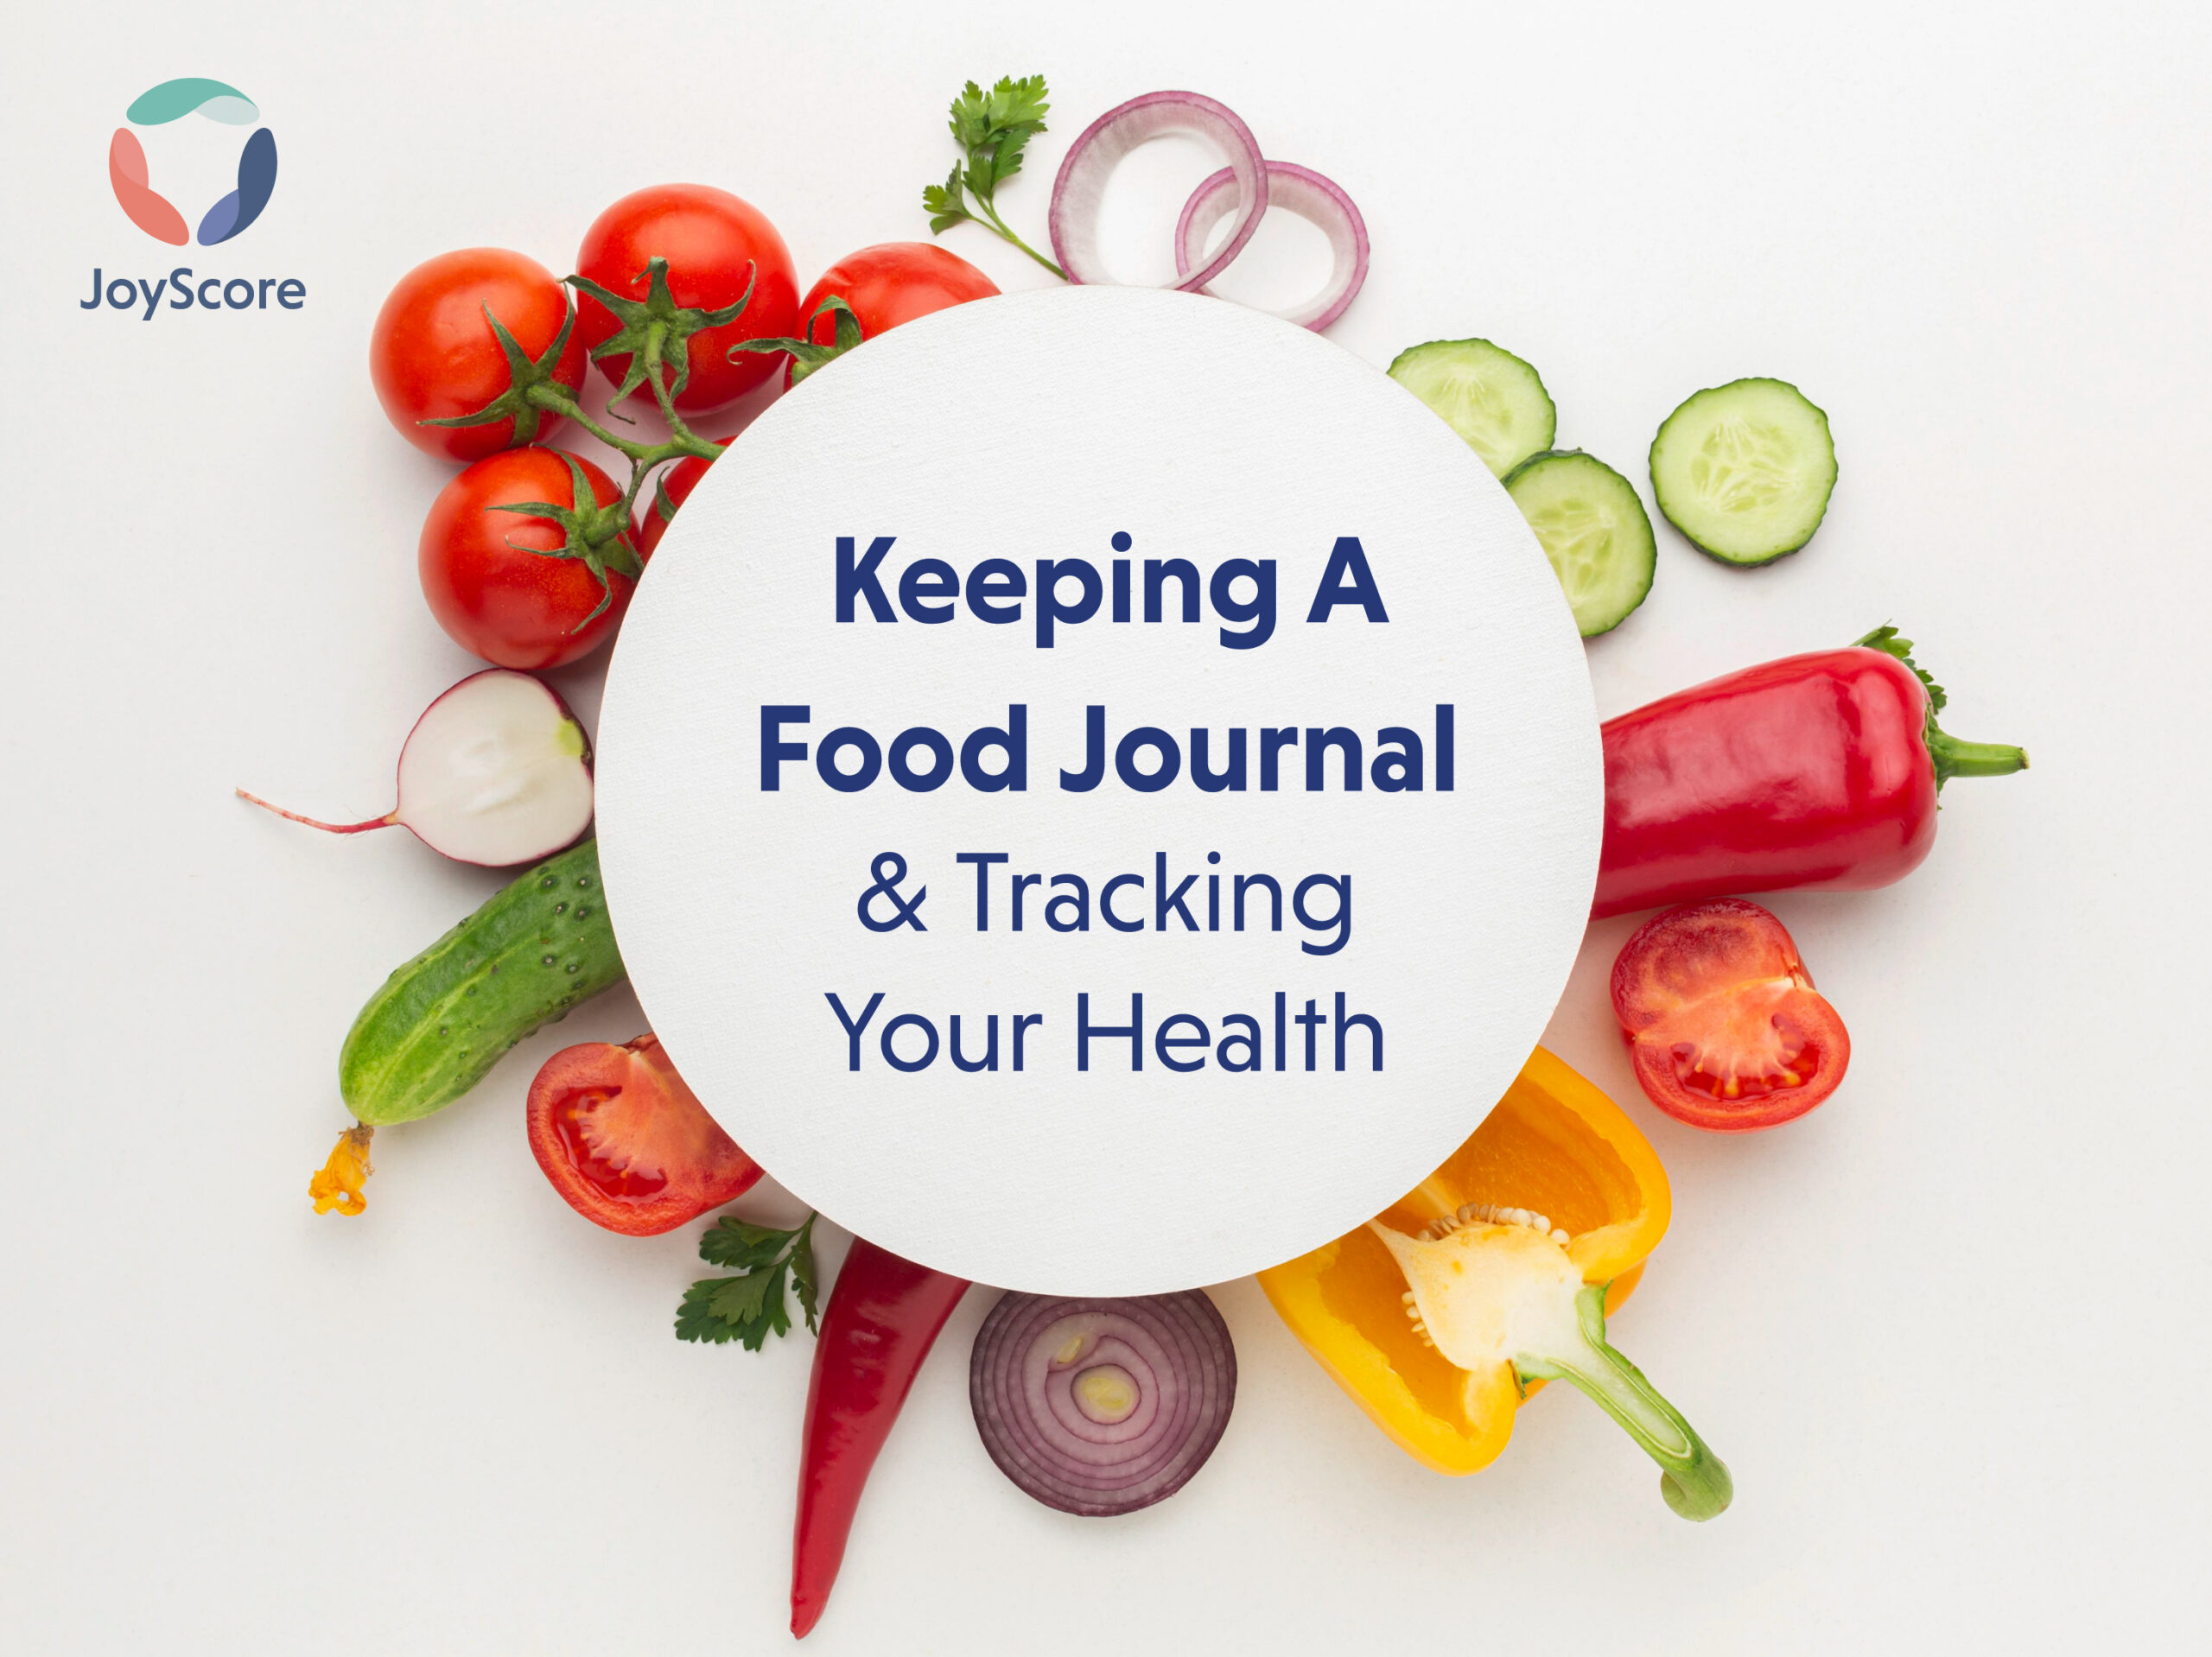 Keeping a food journal and tracking your health